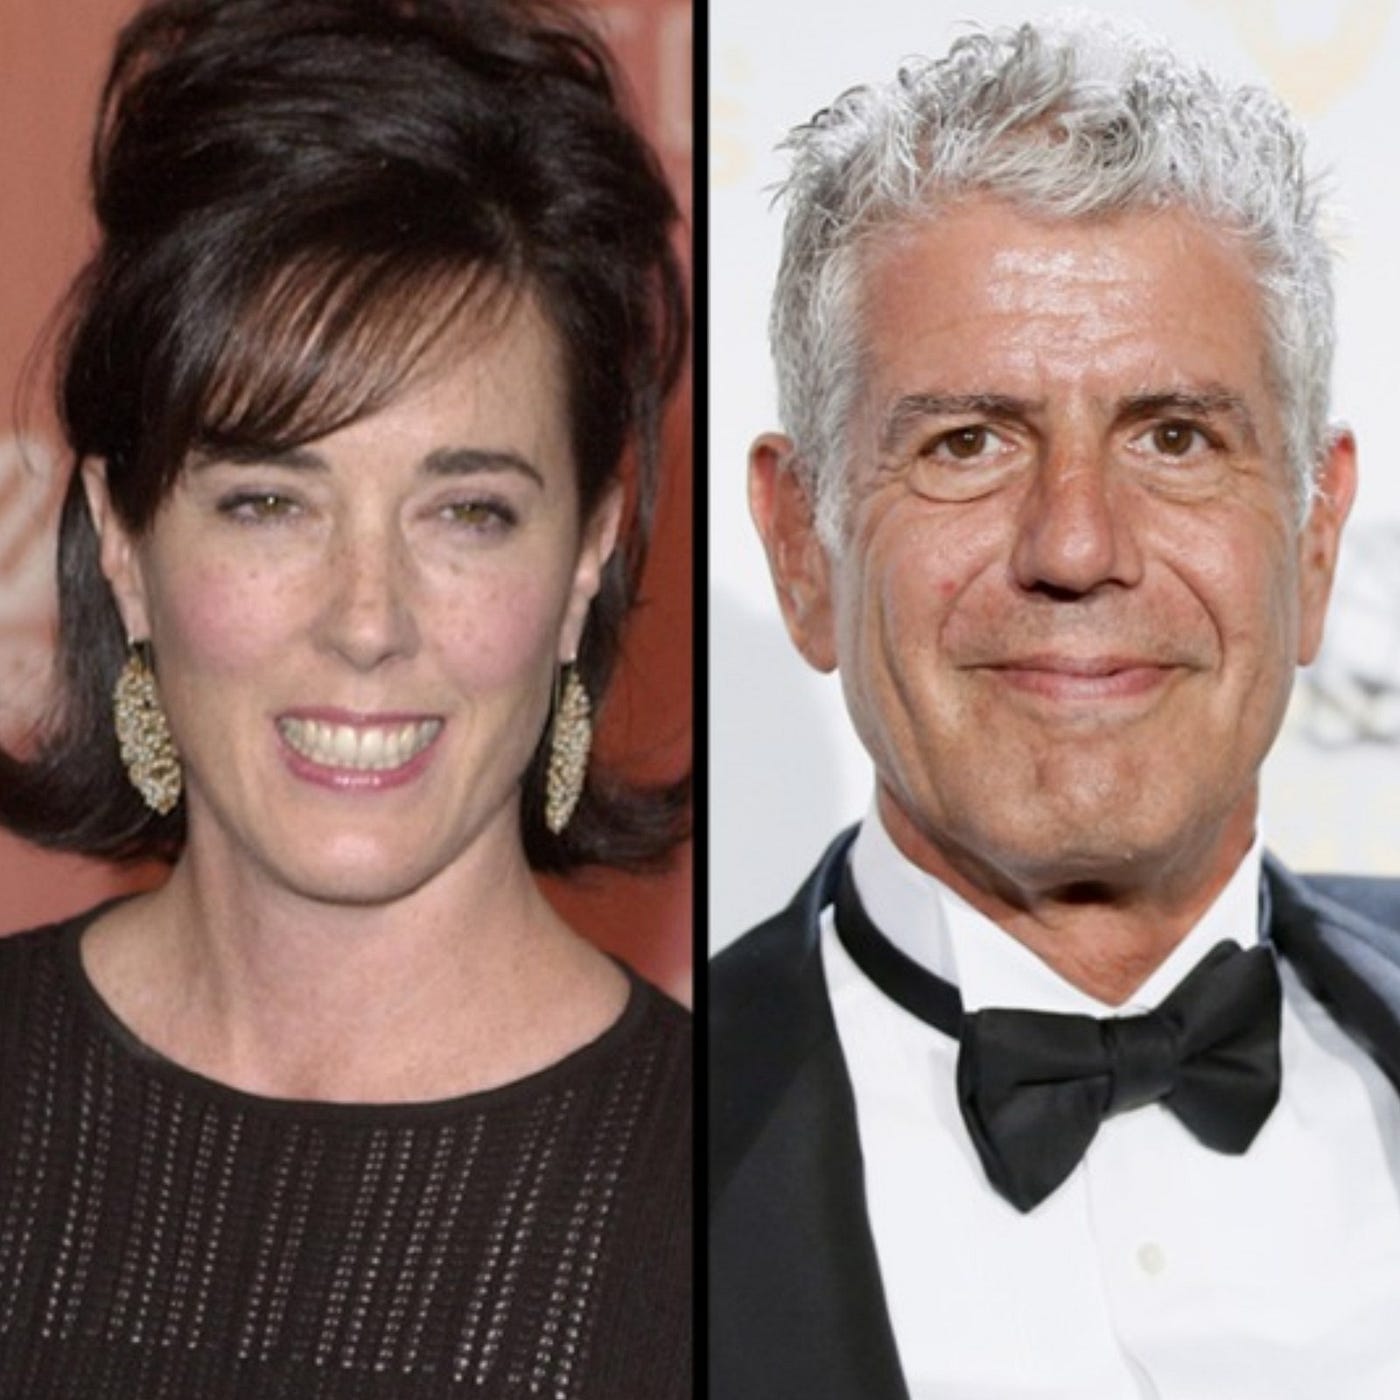 What Did Kate Spade & Anthony Bourdain Have in Common? | by Michael Laitman  | Medium